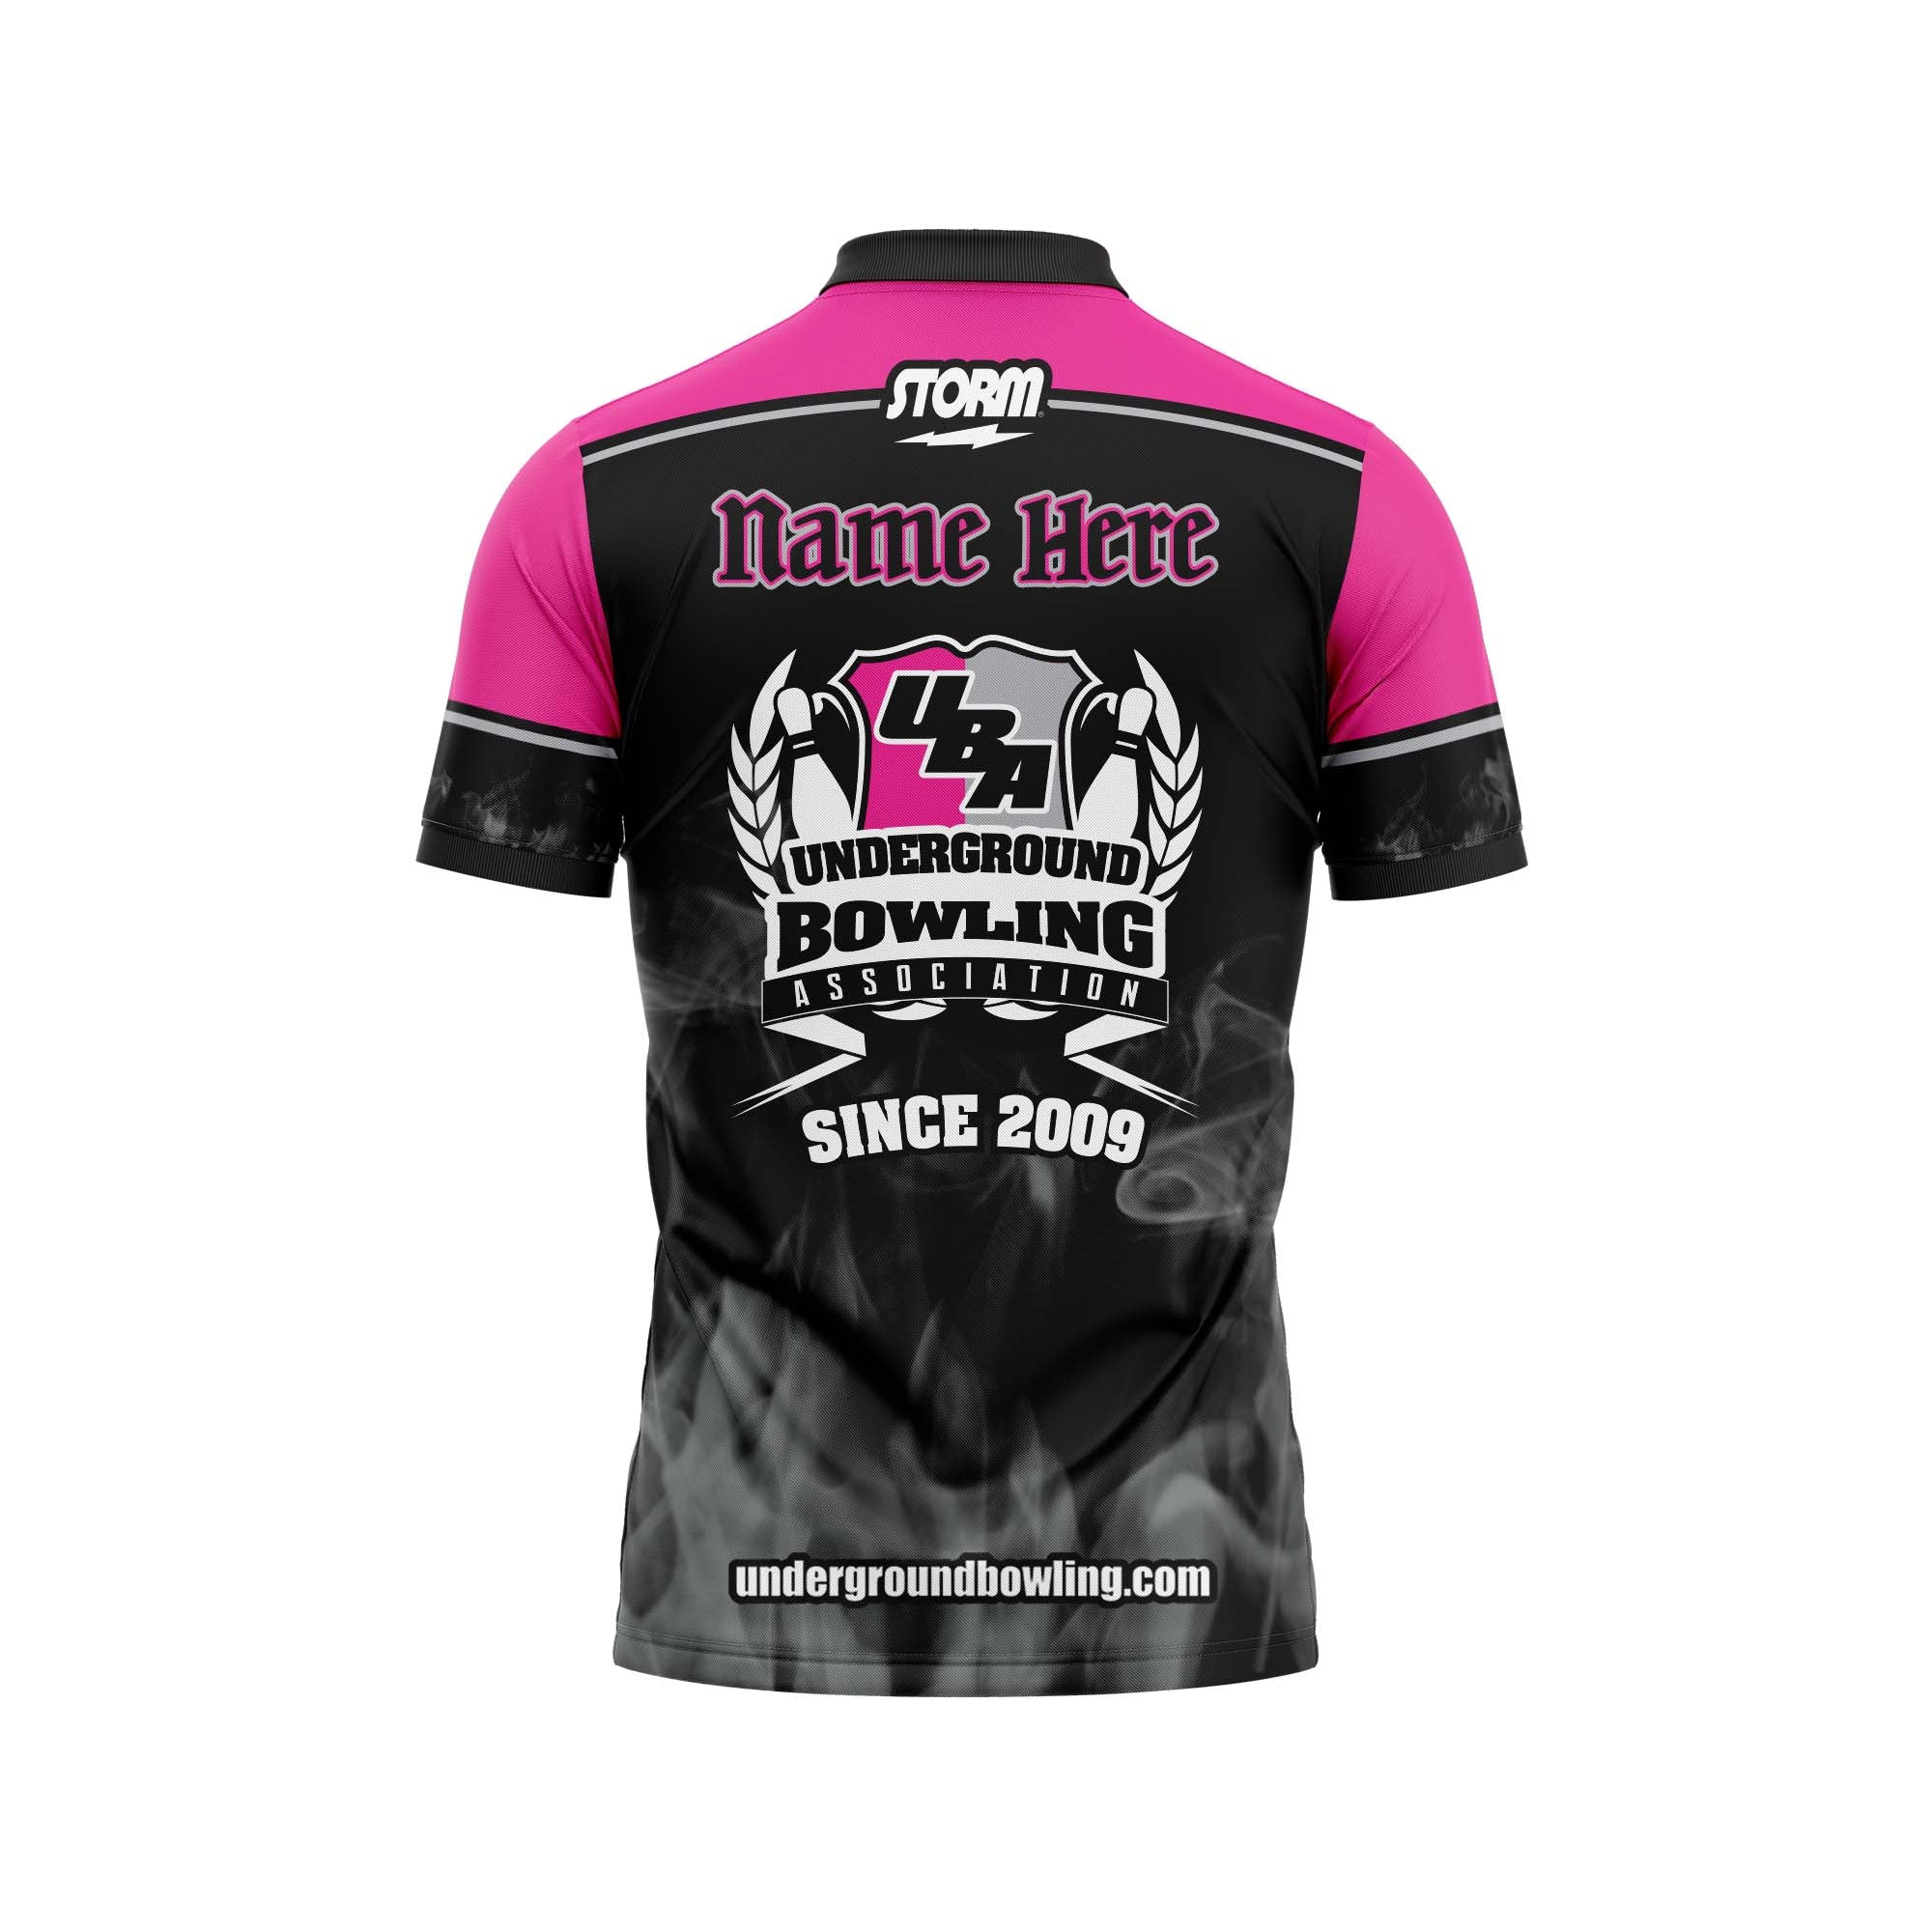 Pheonix Fire Breast Cancer Jersey